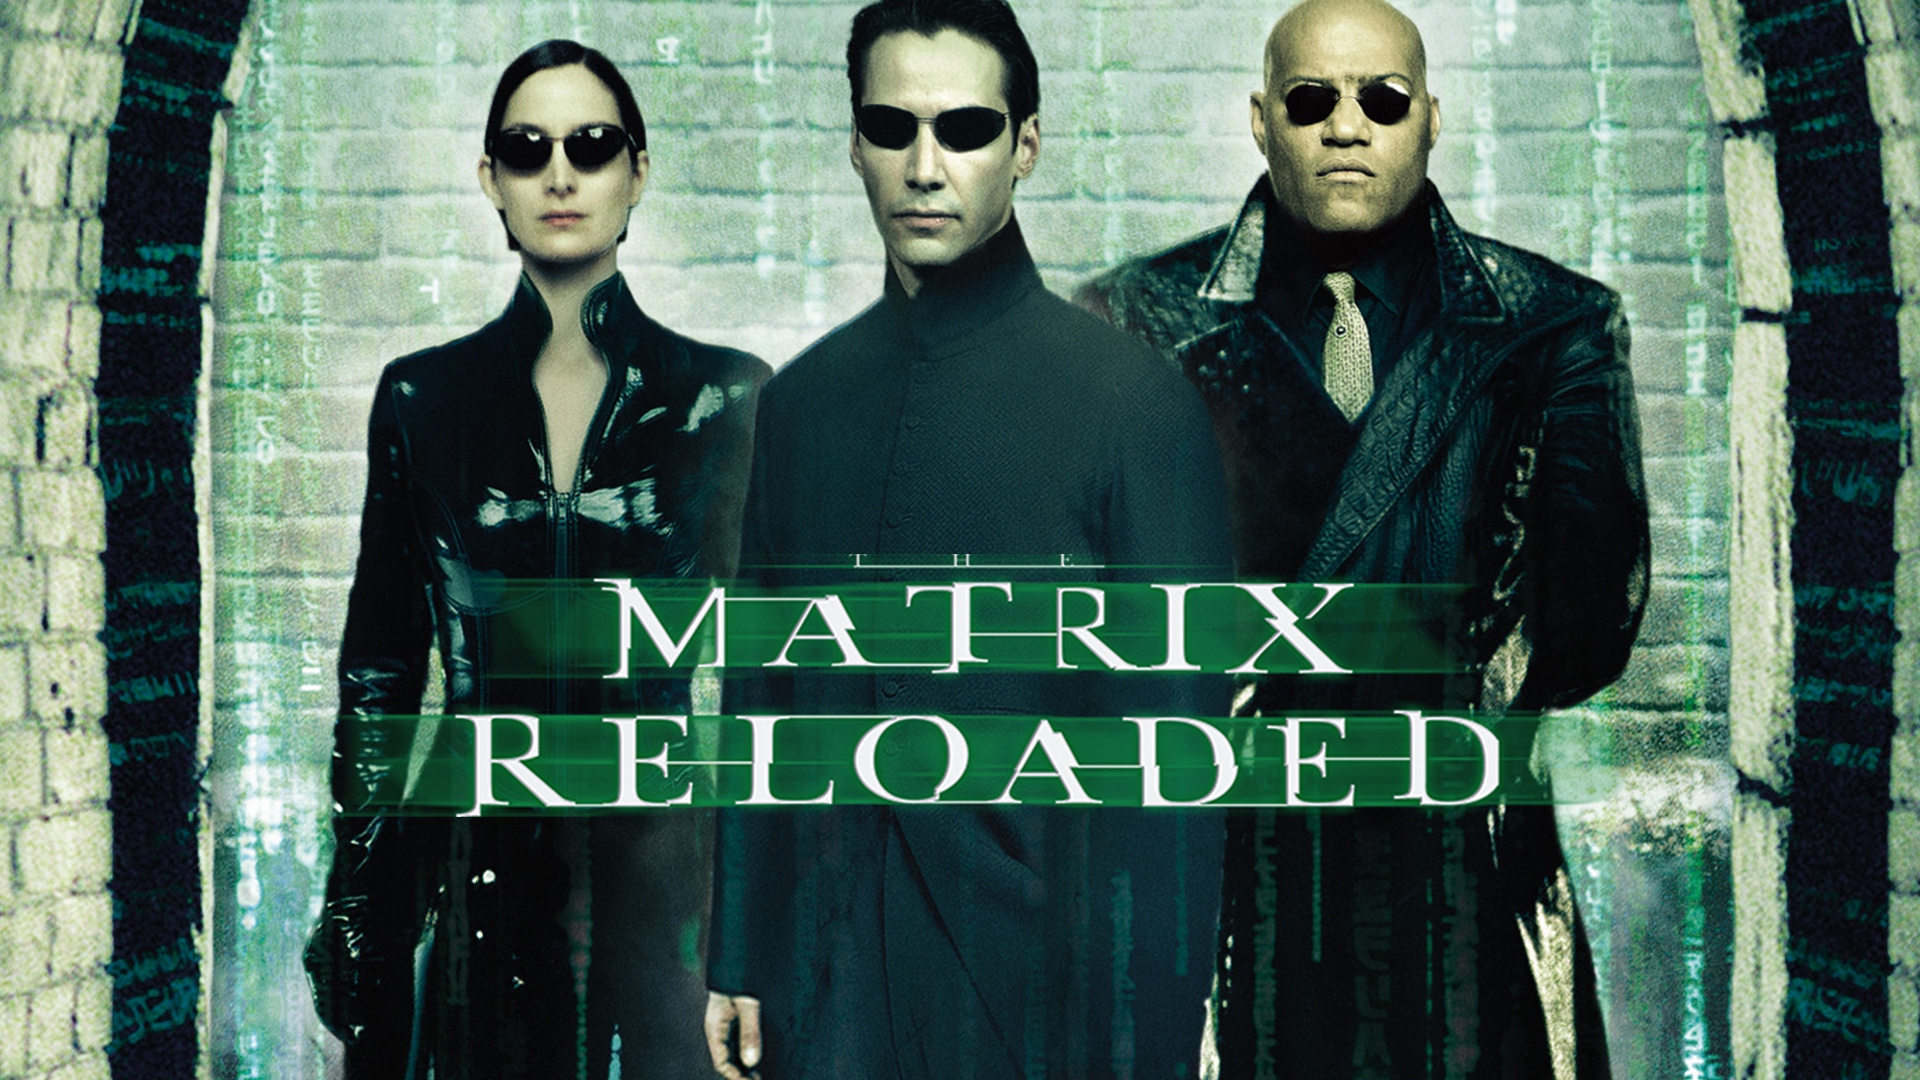 Stream The Matrix Reloaded Online | Download and Watch HD Movies | Stan